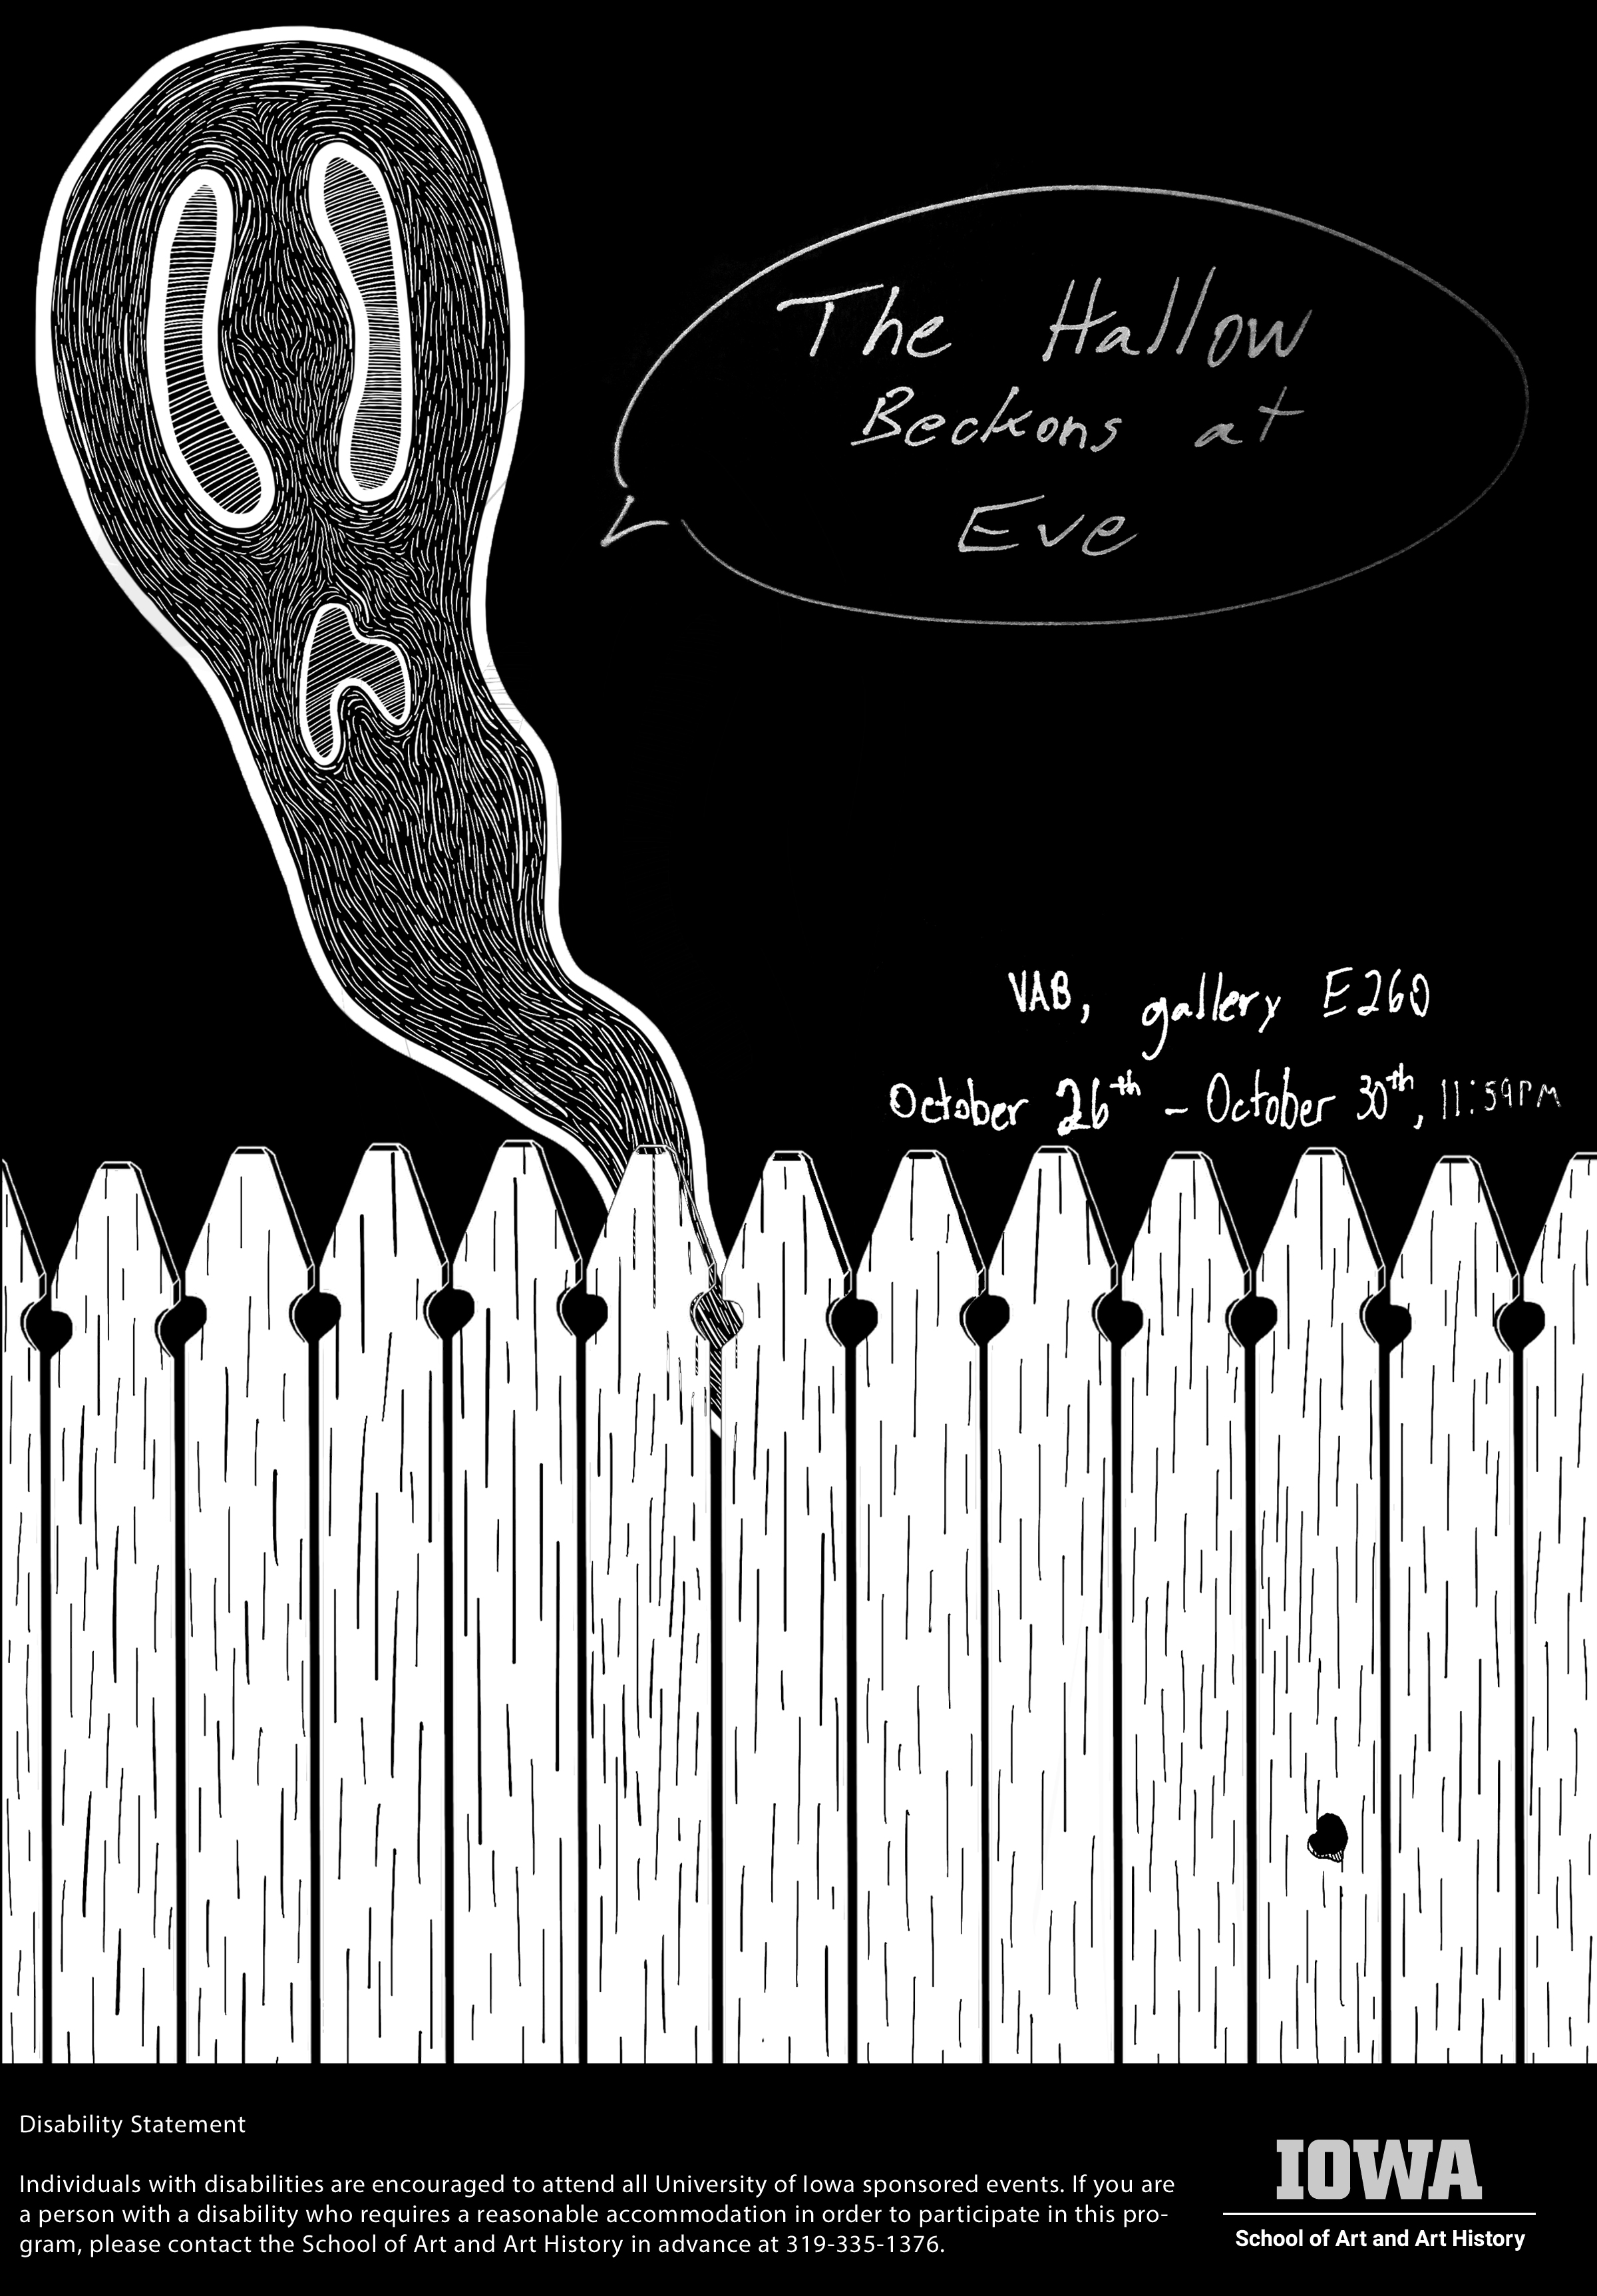 black background with ghost image and white fence ghost "saying bubble" The Hallow Beckons at Eve VAB Gallery E260 October 26th - Oct 30th 11:59 PM